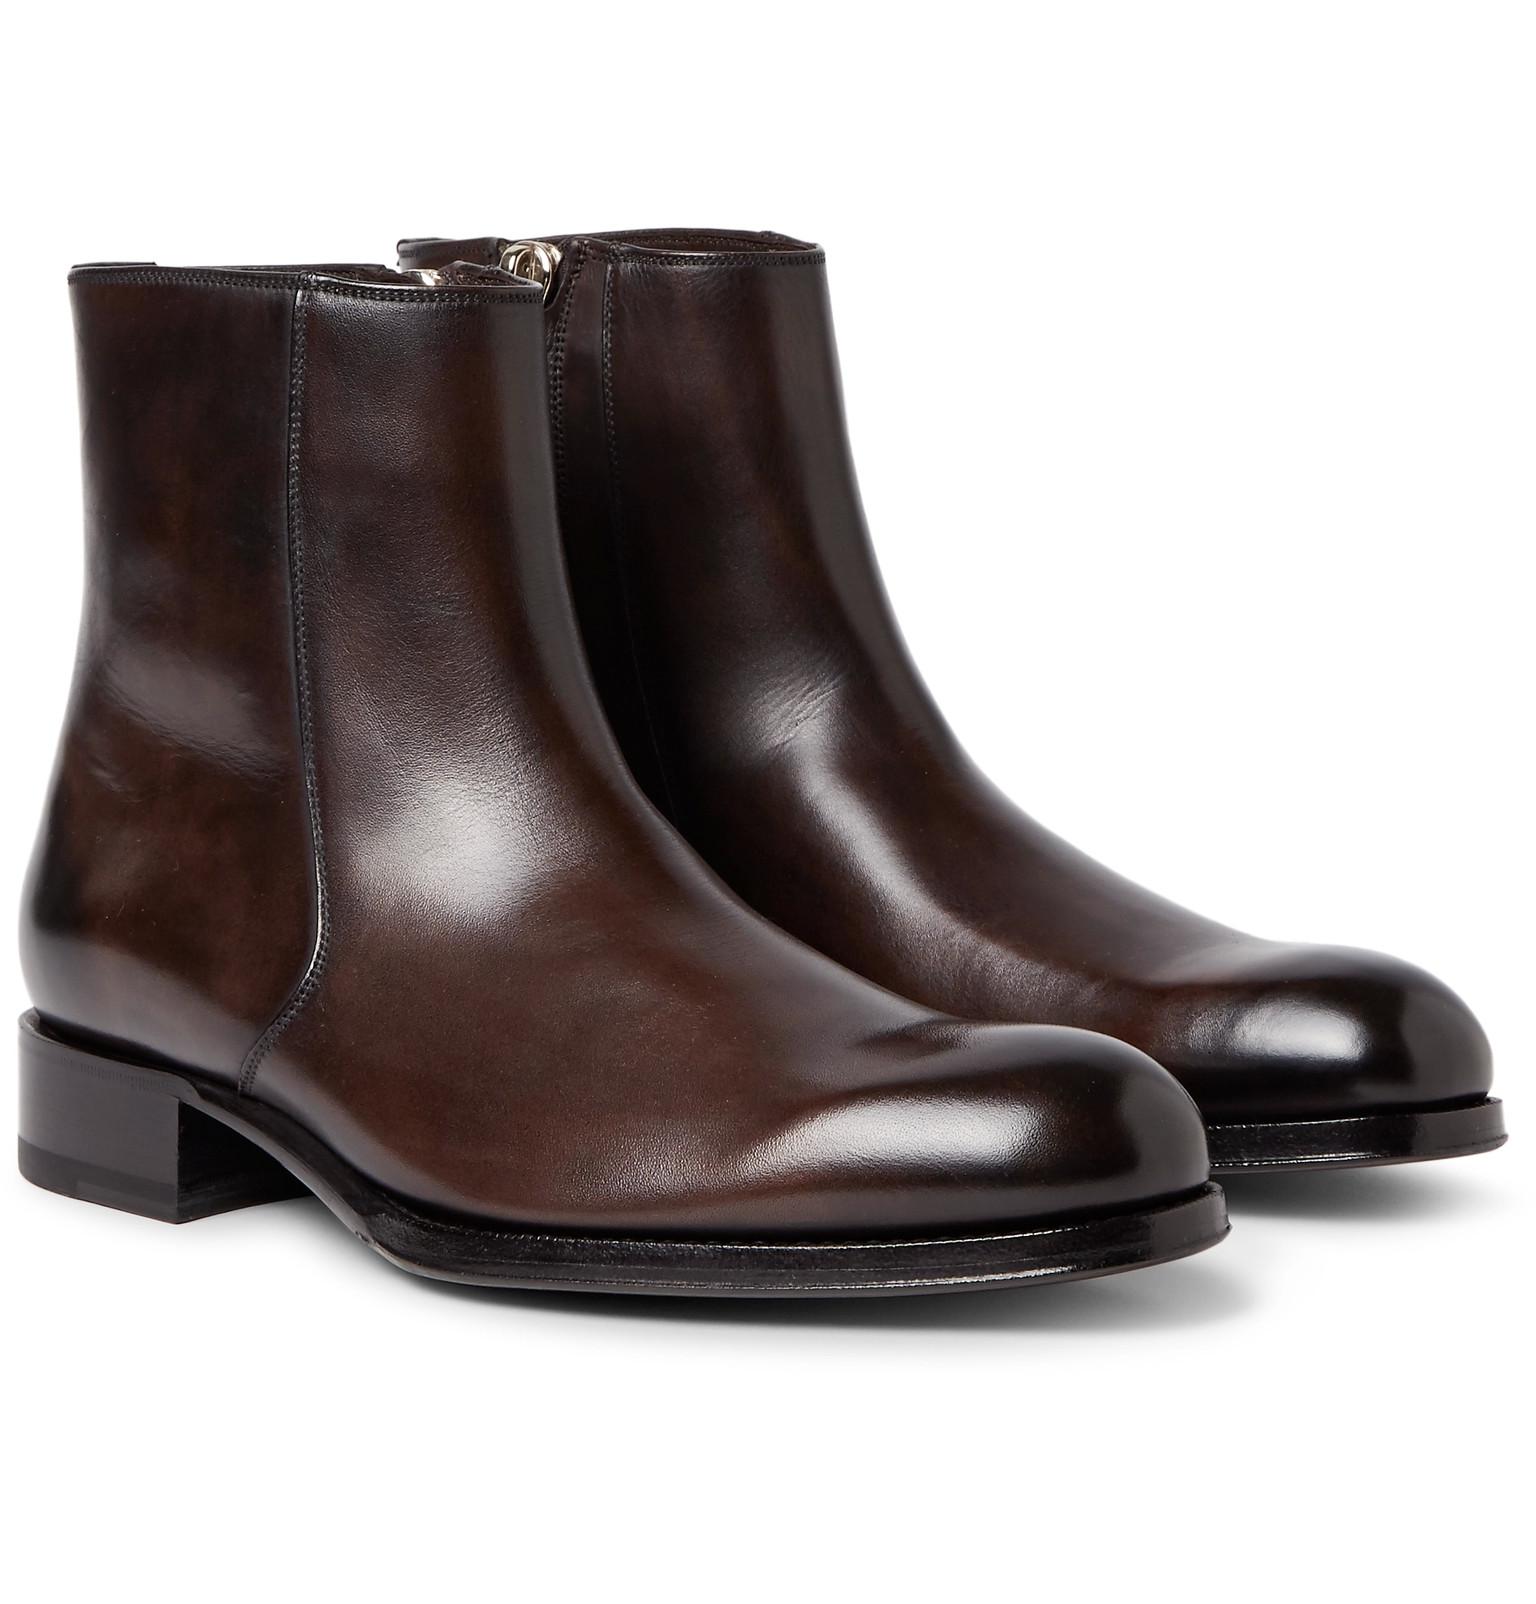 Lyst - Tom Ford Edgar Burnished-leather Boots in Brown for Men